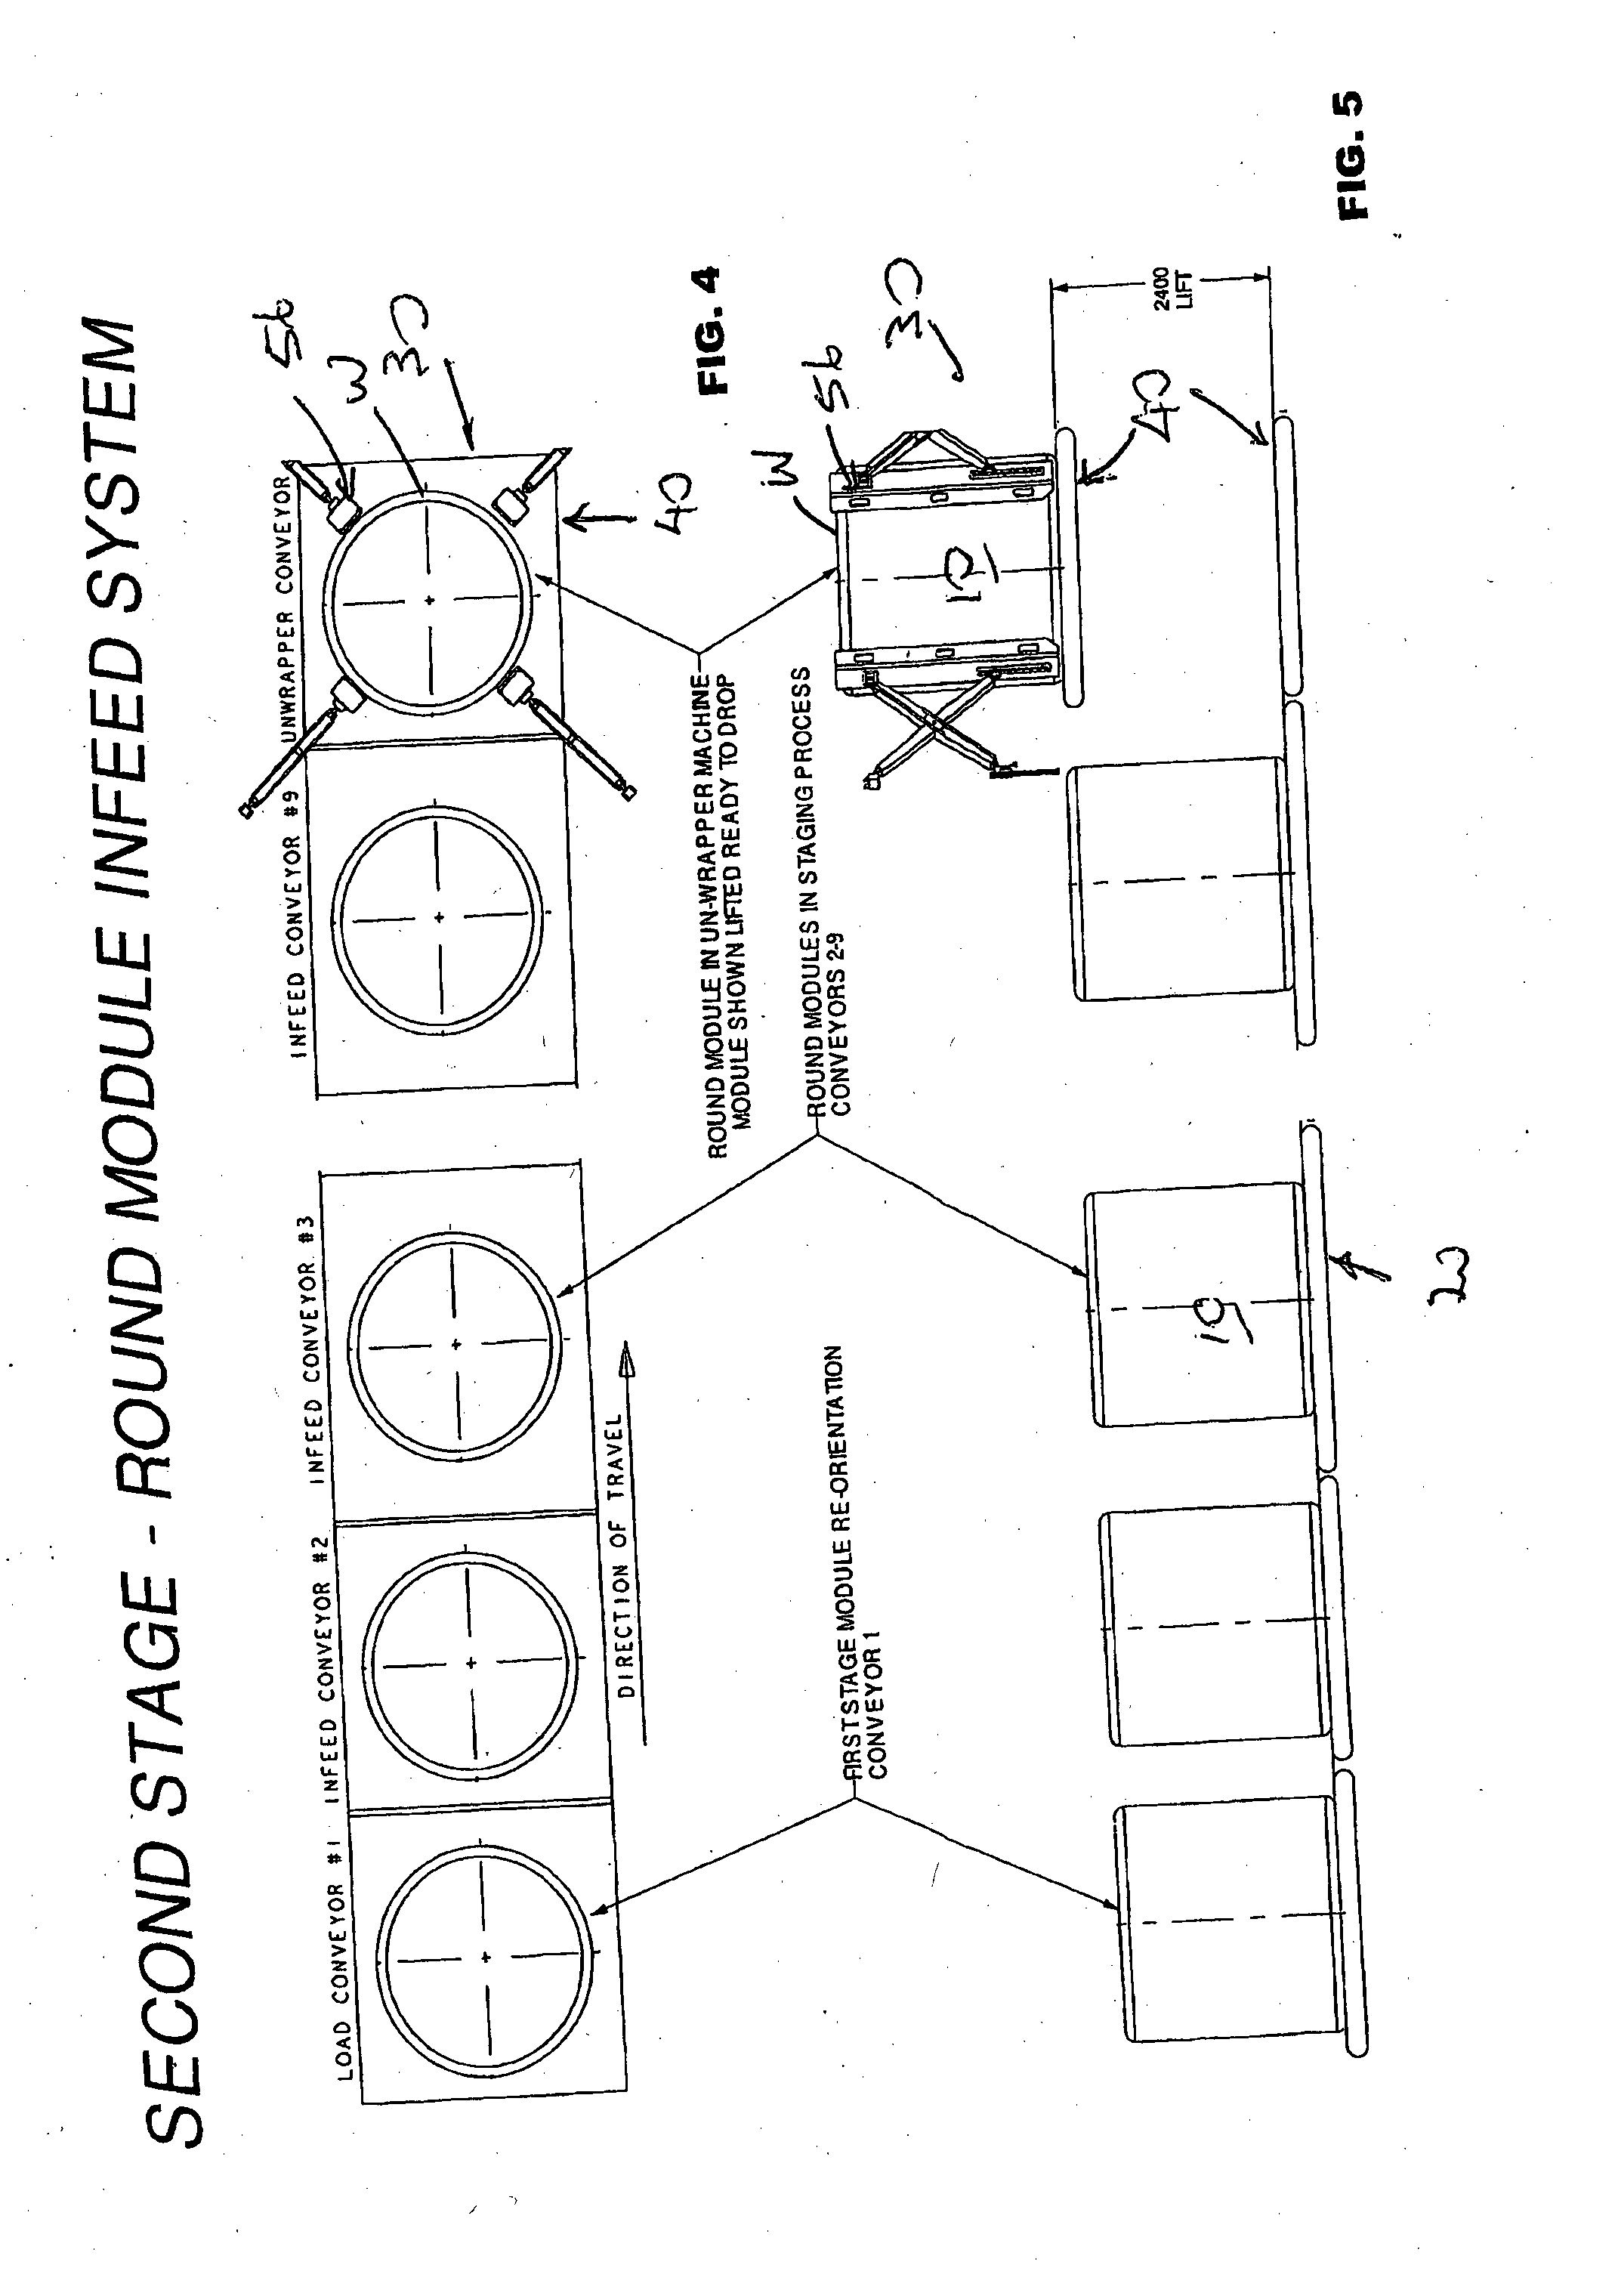 Cotton module unwrapping method and apparatus